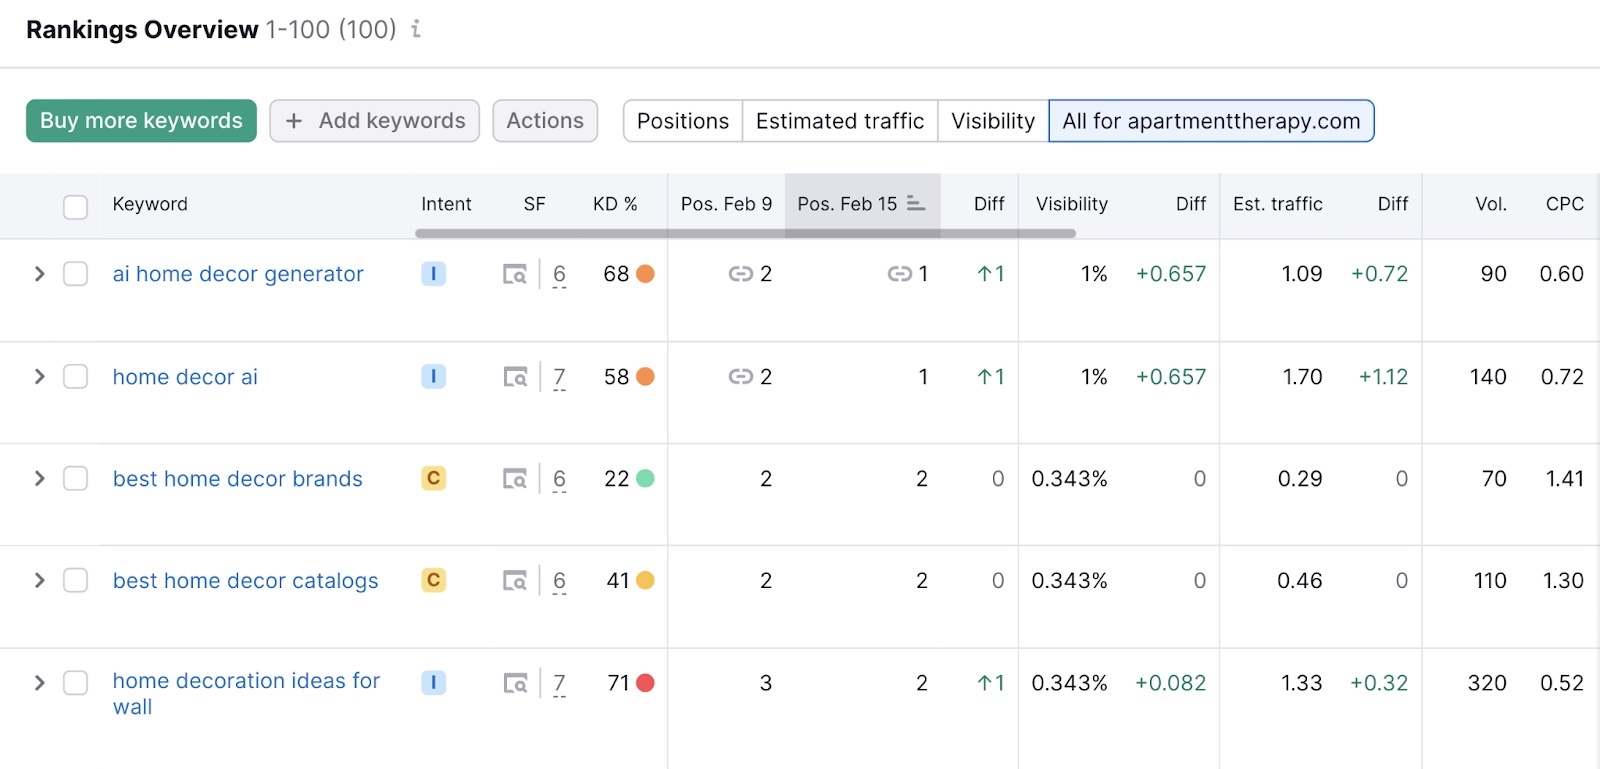 Rankings overview report in Semrush, showing keywords and their key metrics